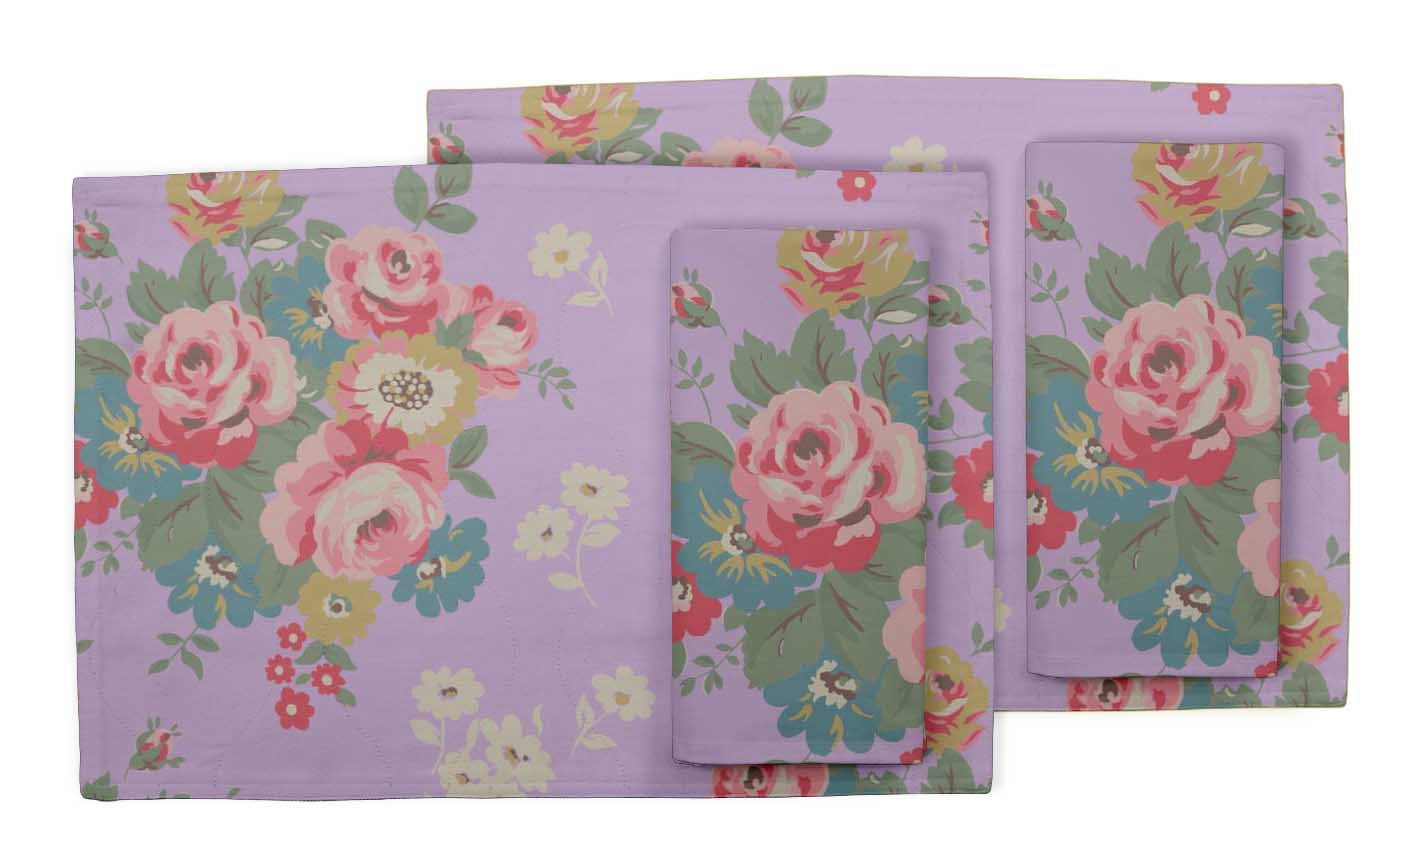 Details about   S4Sassy Leaves,Rose & Narcissus Anemone Placemats & Napkins Table Mats-FL-22D 